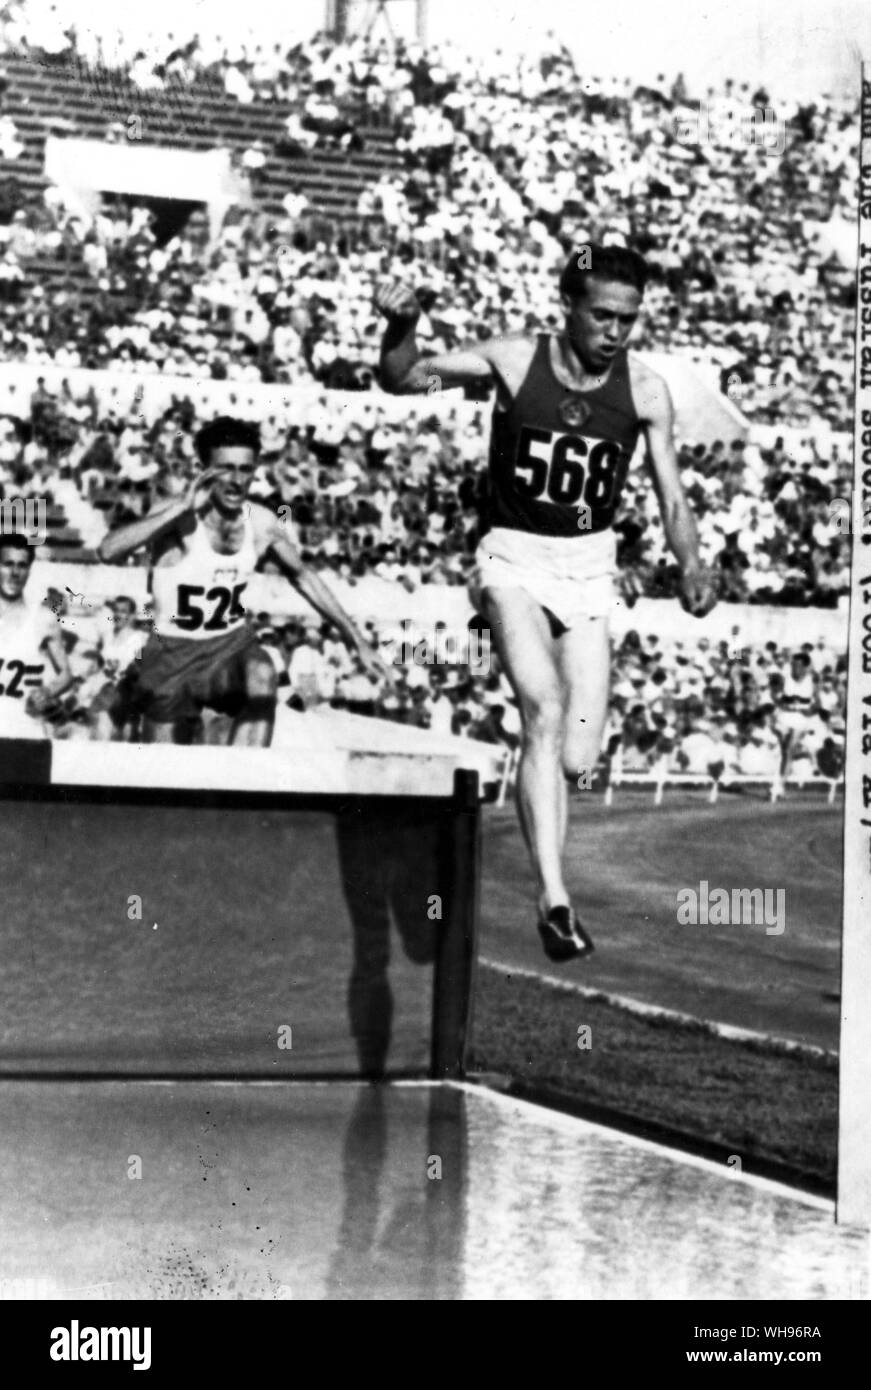 Italy, Rome, Olympic Games, 1960: Nikolai Sokolov takes the water splash ahead of Poland's Zdzislaw Krzyszkowiak in the 3000m steeplechase at the Olympic stadium, but the Pole finished first in the race and the Russian, second.. Stock Photo